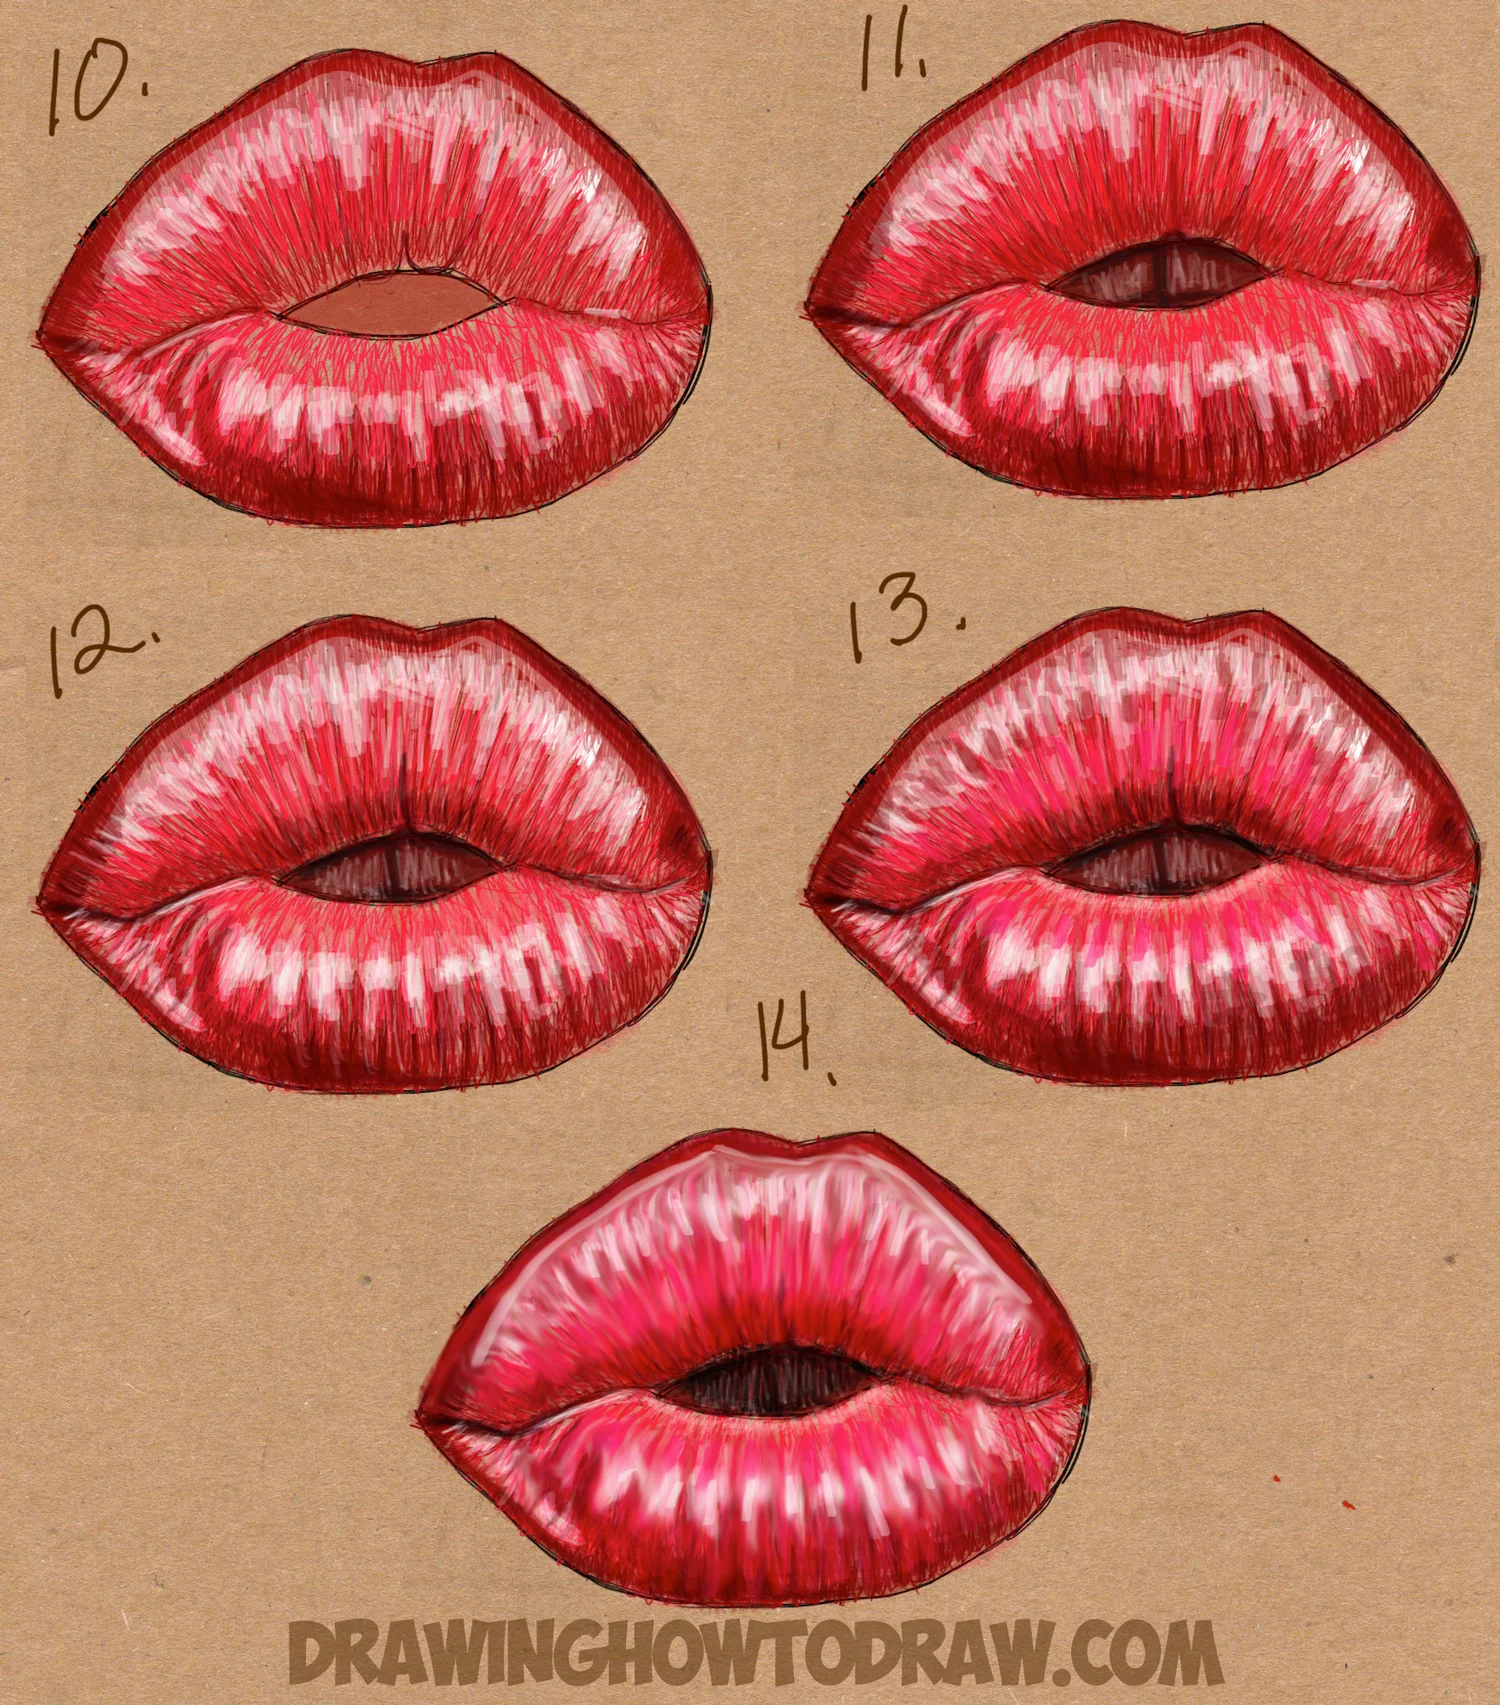 How To Draw Kissy Kissing Puckering Sexy Lips How To Draw Step By Step Drawing Tutorials Cute drawings lip drawings drawing eyes. how to draw kissy kissing puckering